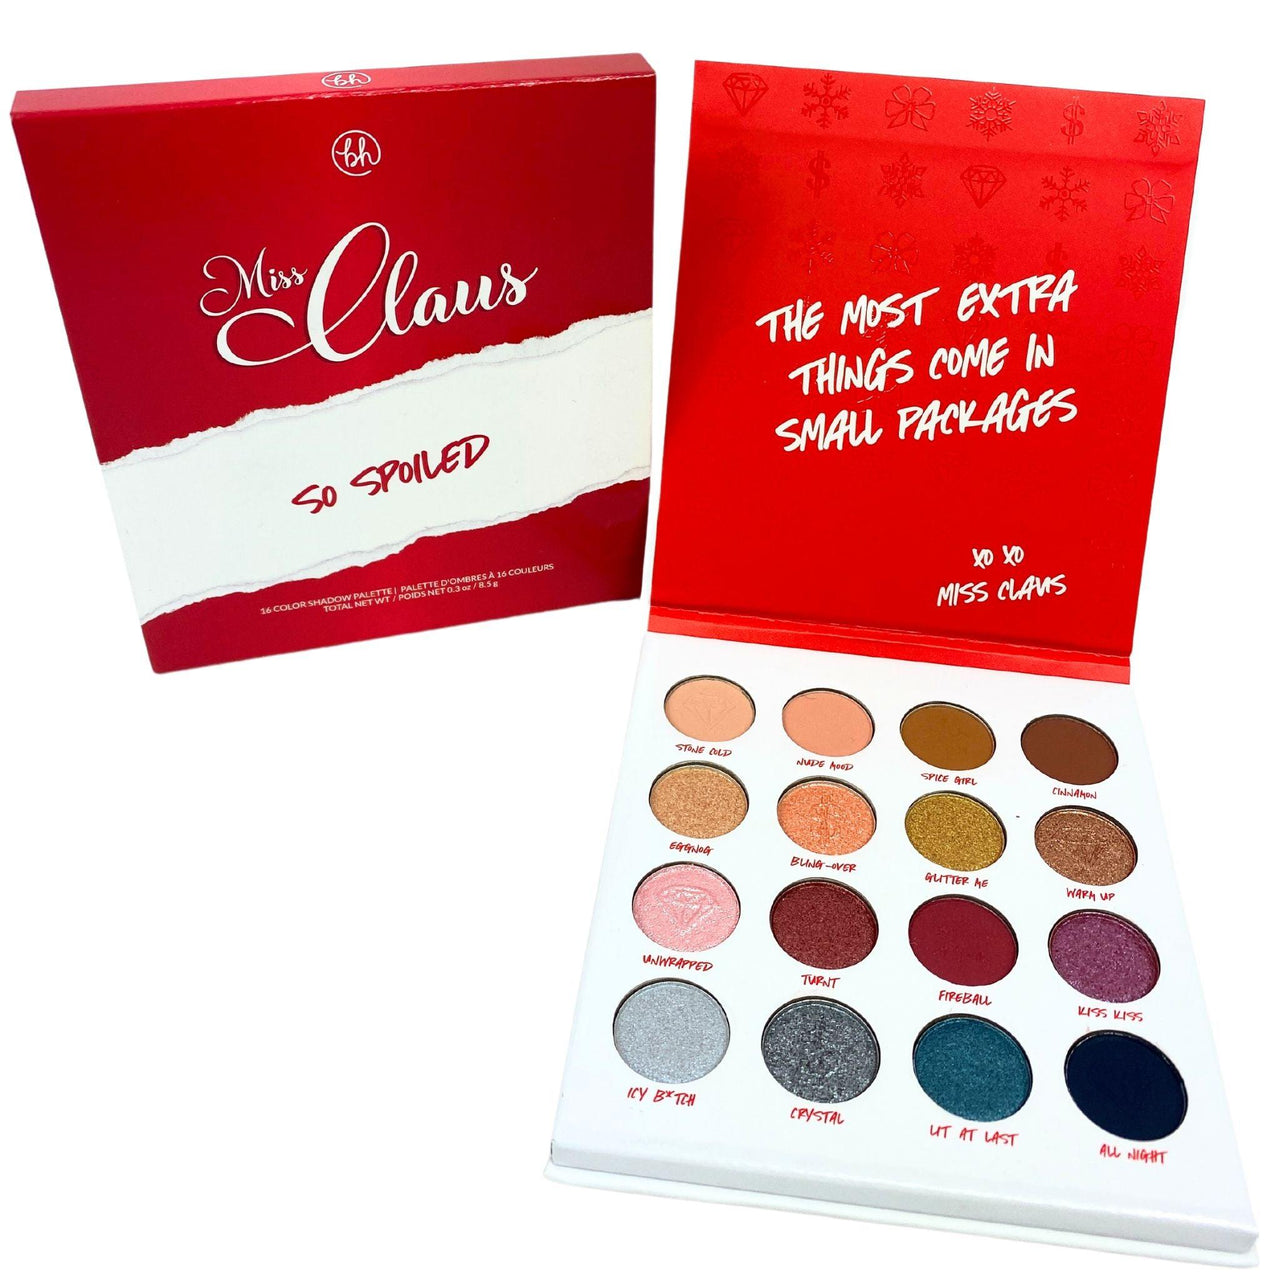 BH Cosmetics Miss Claus SO SPOILED 16 color shadow Palette (48 Pcs Lot) - Discount Wholesalers Inc